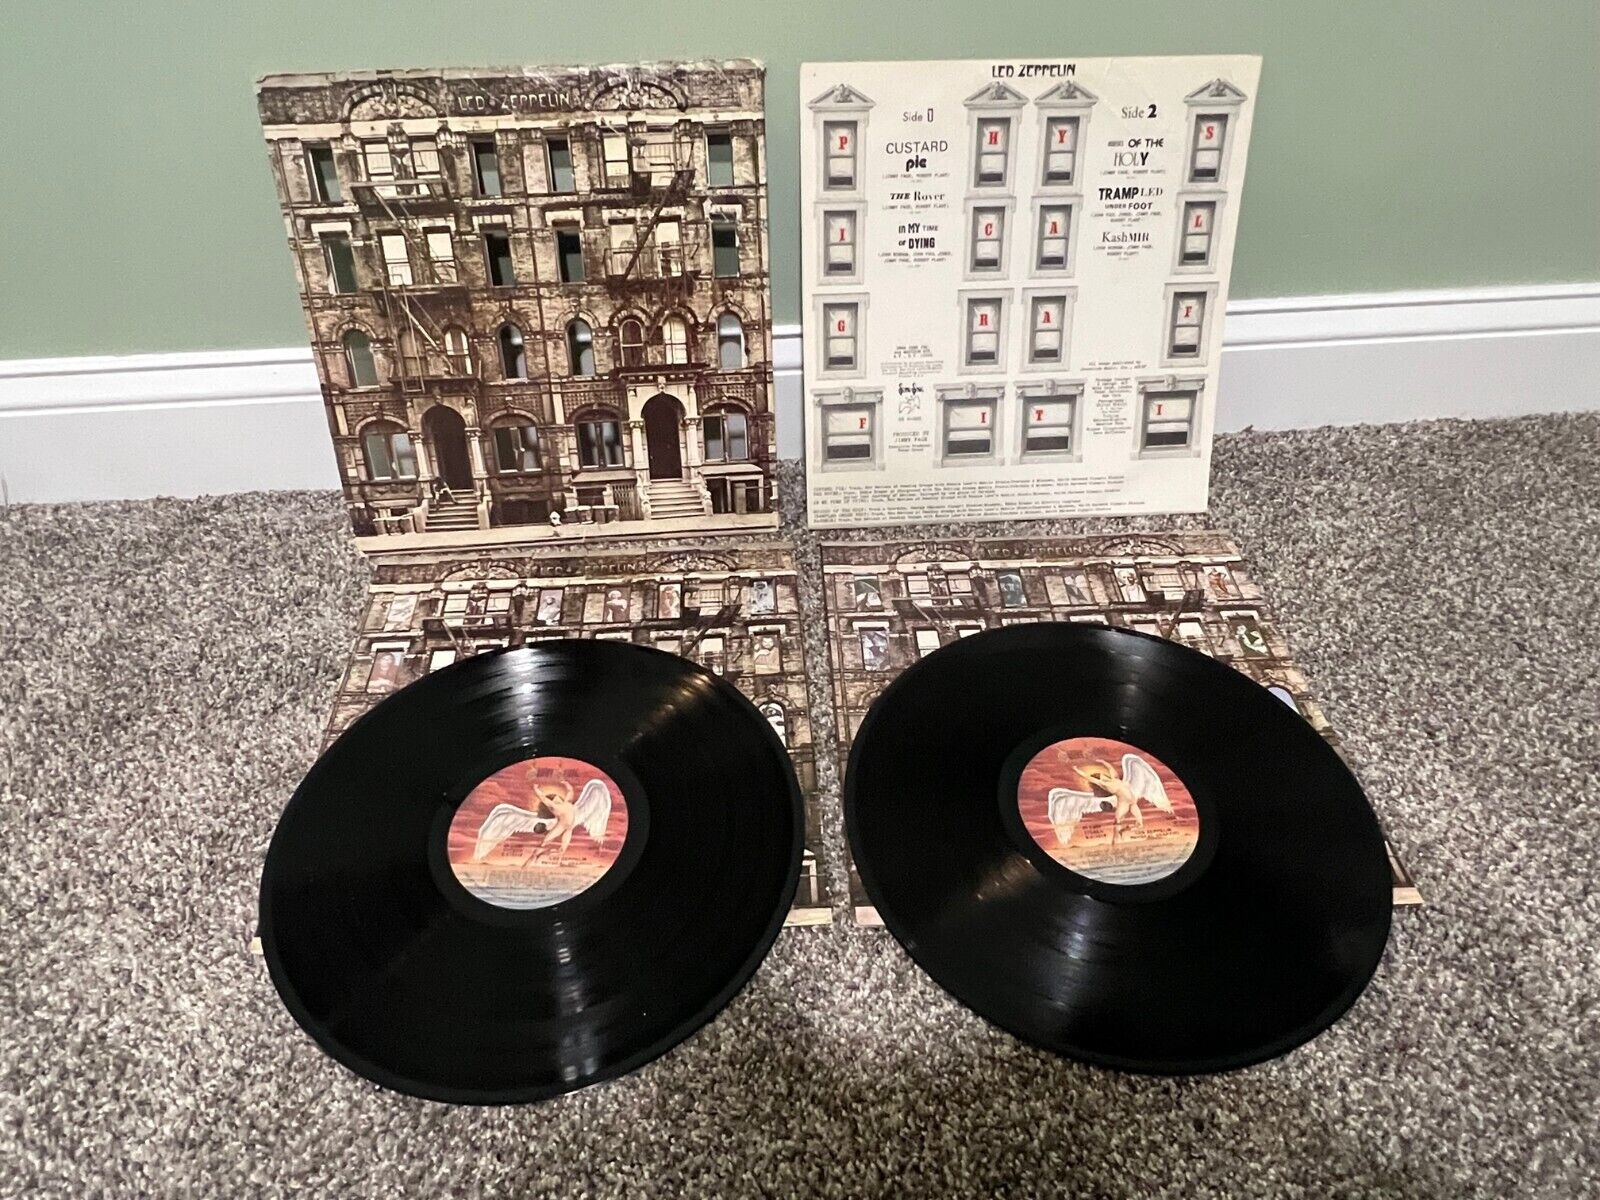 Pic 1 LED ZEPPELIN - 3 Vinyl LPs Presence Physical Graffiti Song Remains the Same